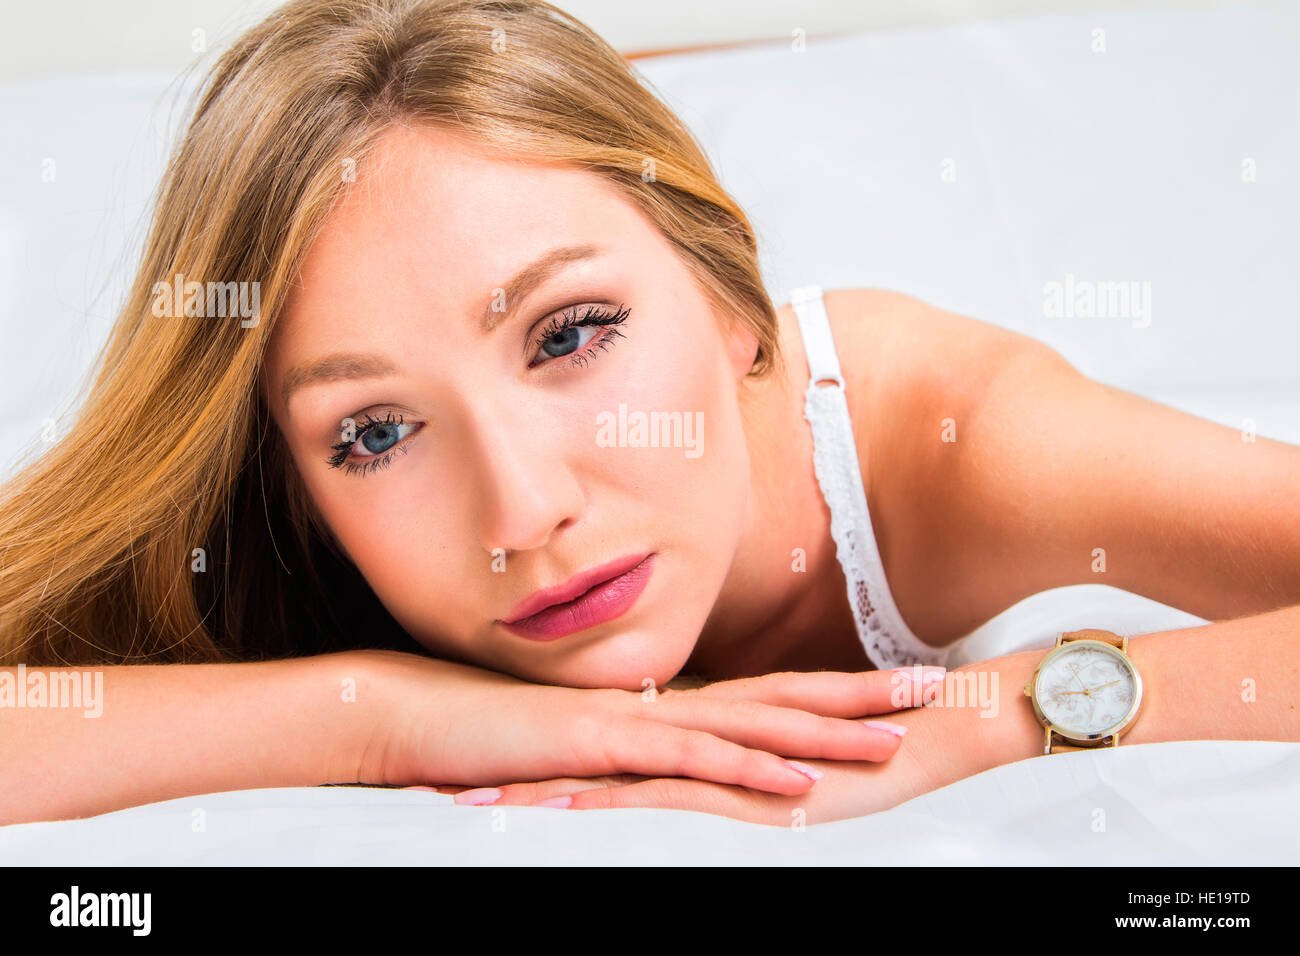 Sexy girl in white lace underwear lying on the bed, looking sad and alone  Stock Photo